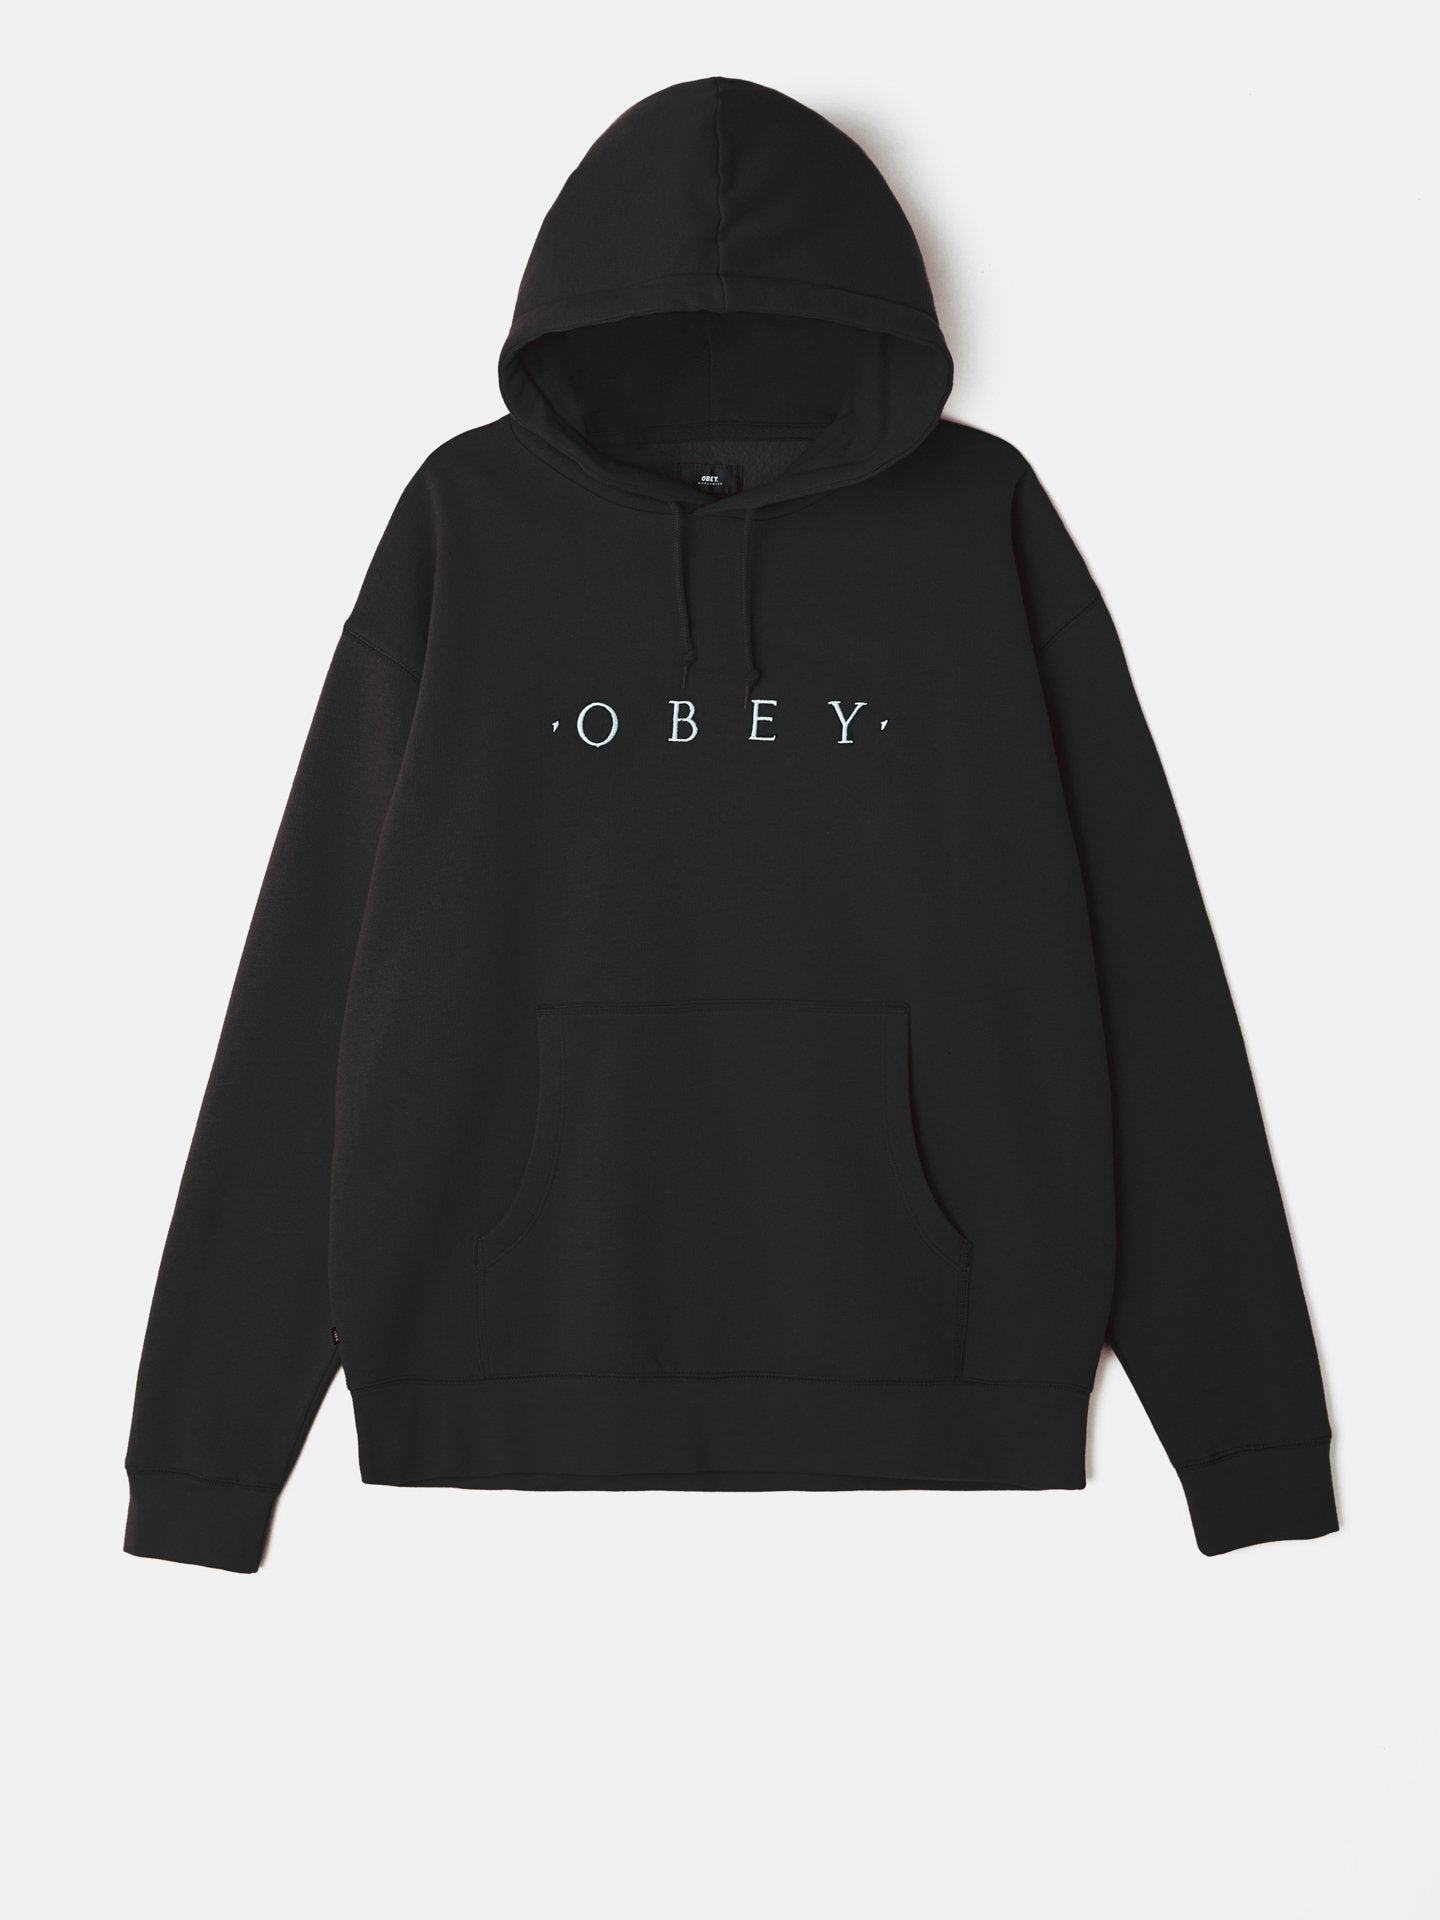 OBEY - Distant Pullover Men's Hoodie, Black - The Giant Peach